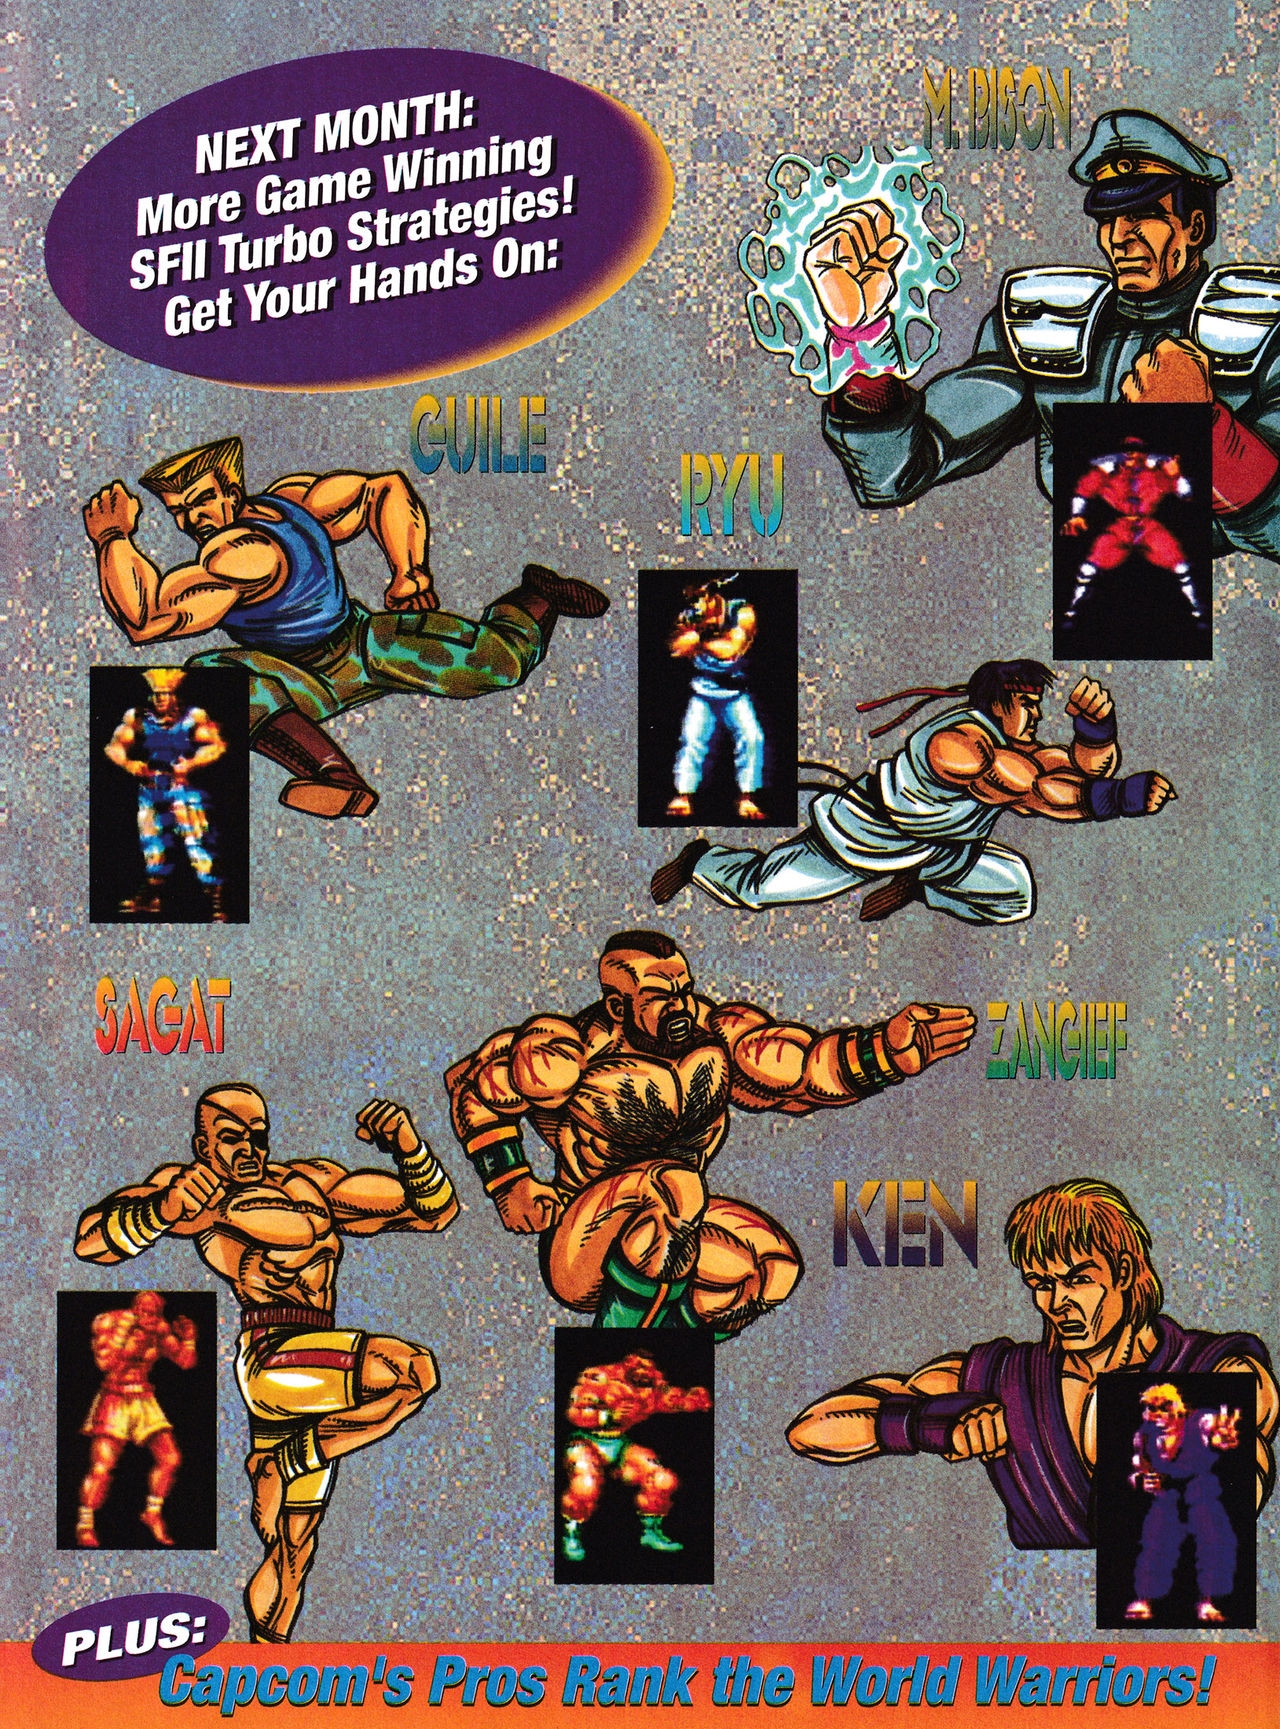 Street Fighter II Turbo Straegy Guide Part 1 15